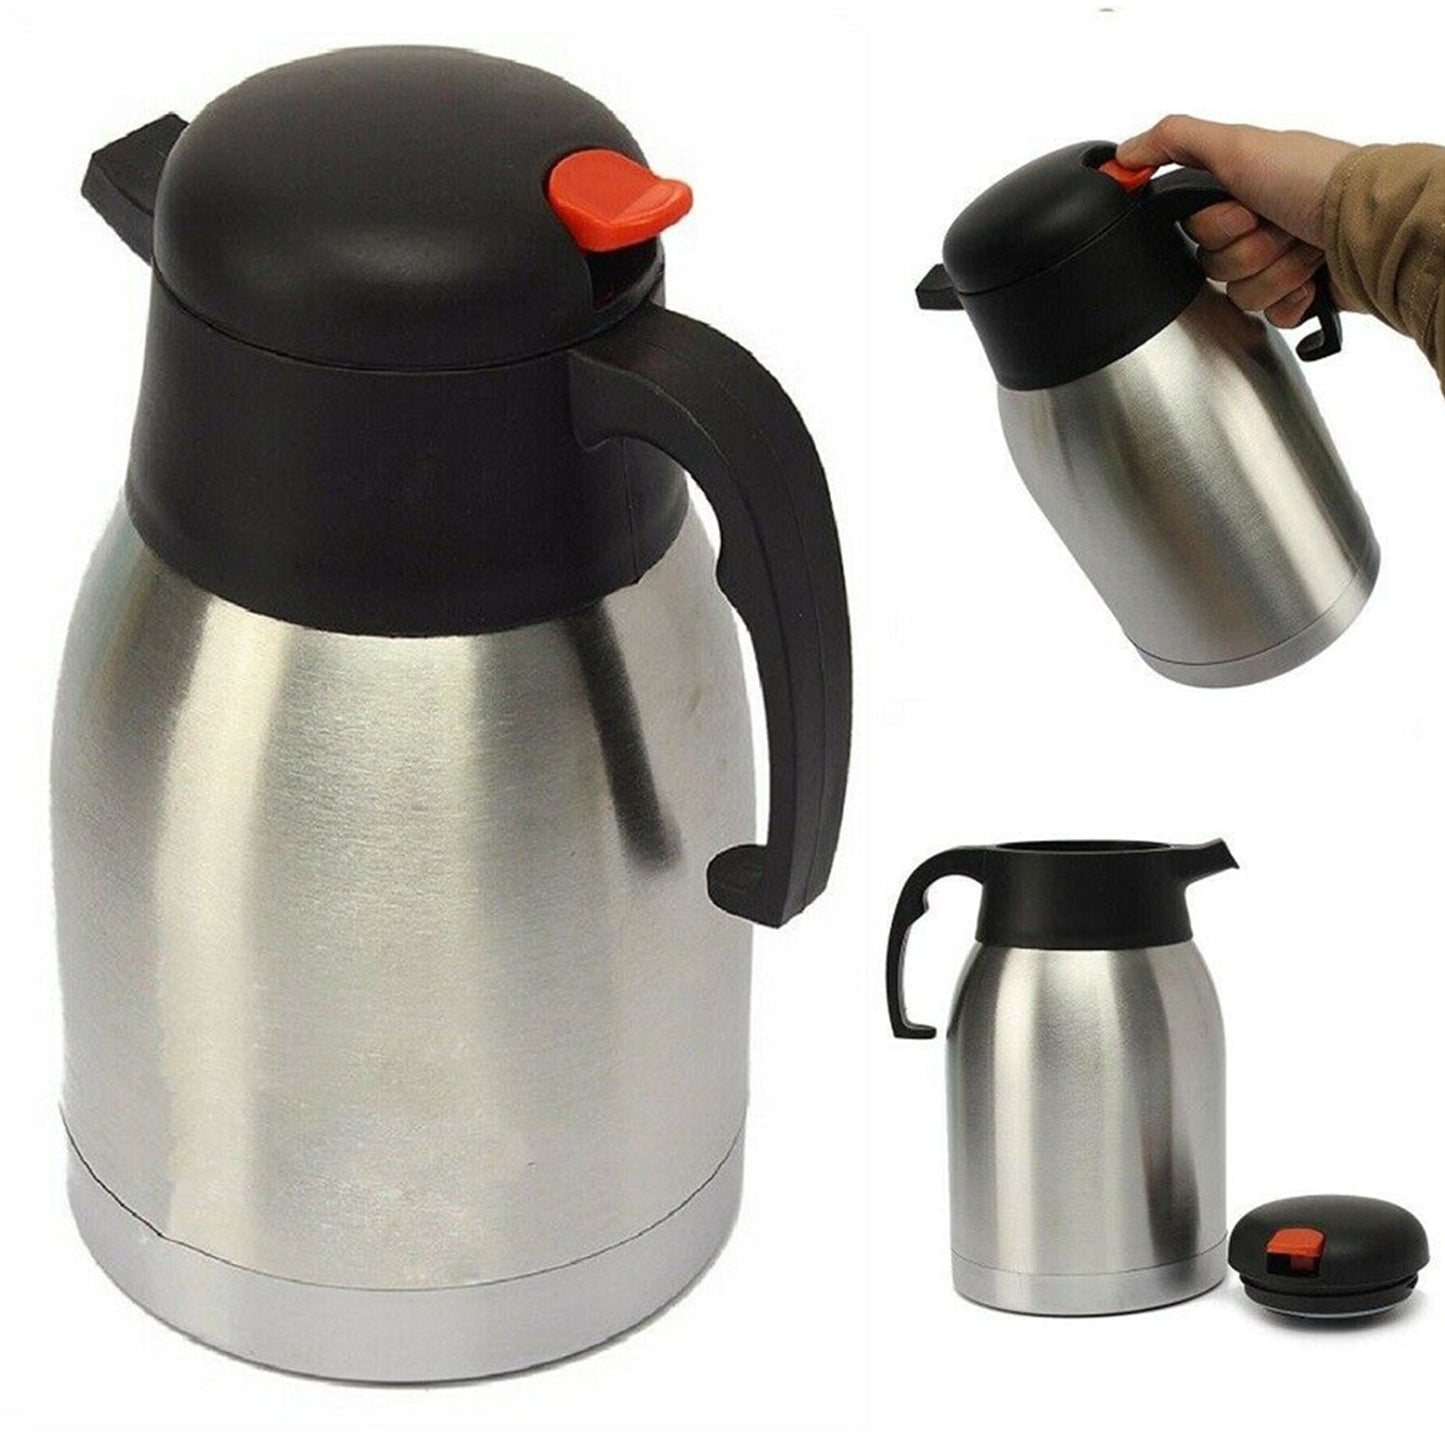 6458 Thermos steel Flip Lid Flask, 1500 milliliters - SWASTIK CREATIONS The Trend Point SWASTIK CREATIONS The Trend Point